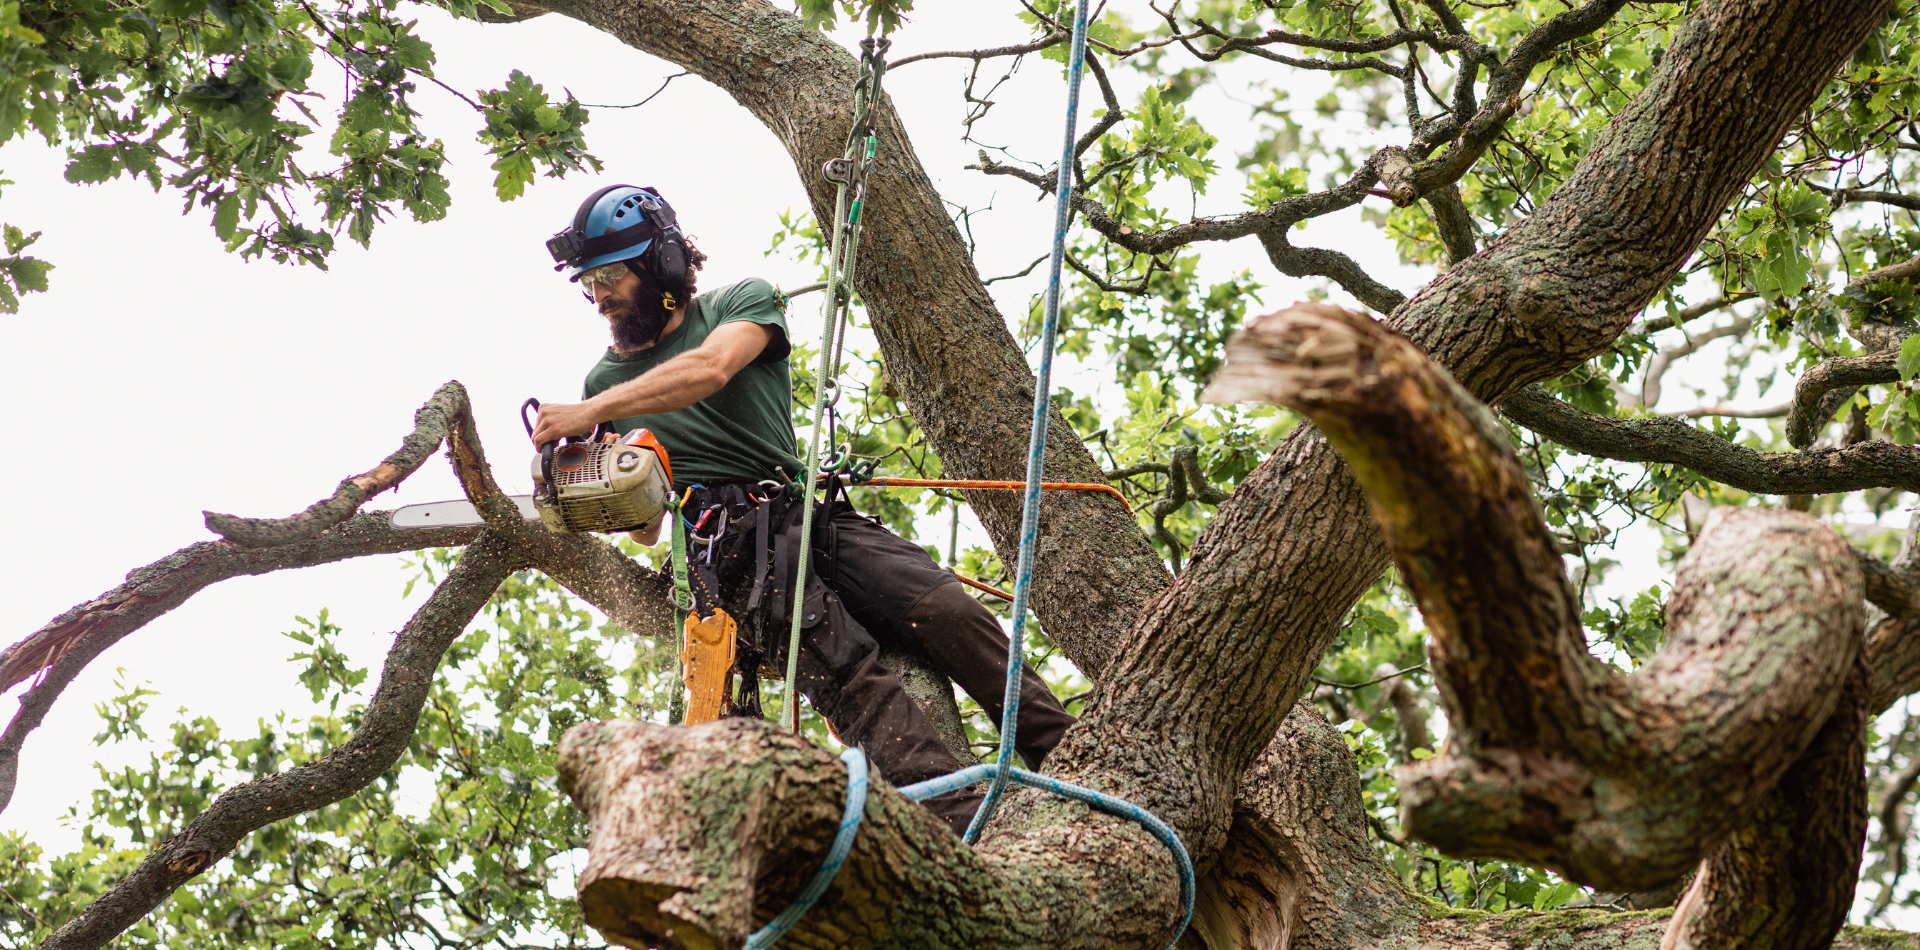 Arborist working in a tree